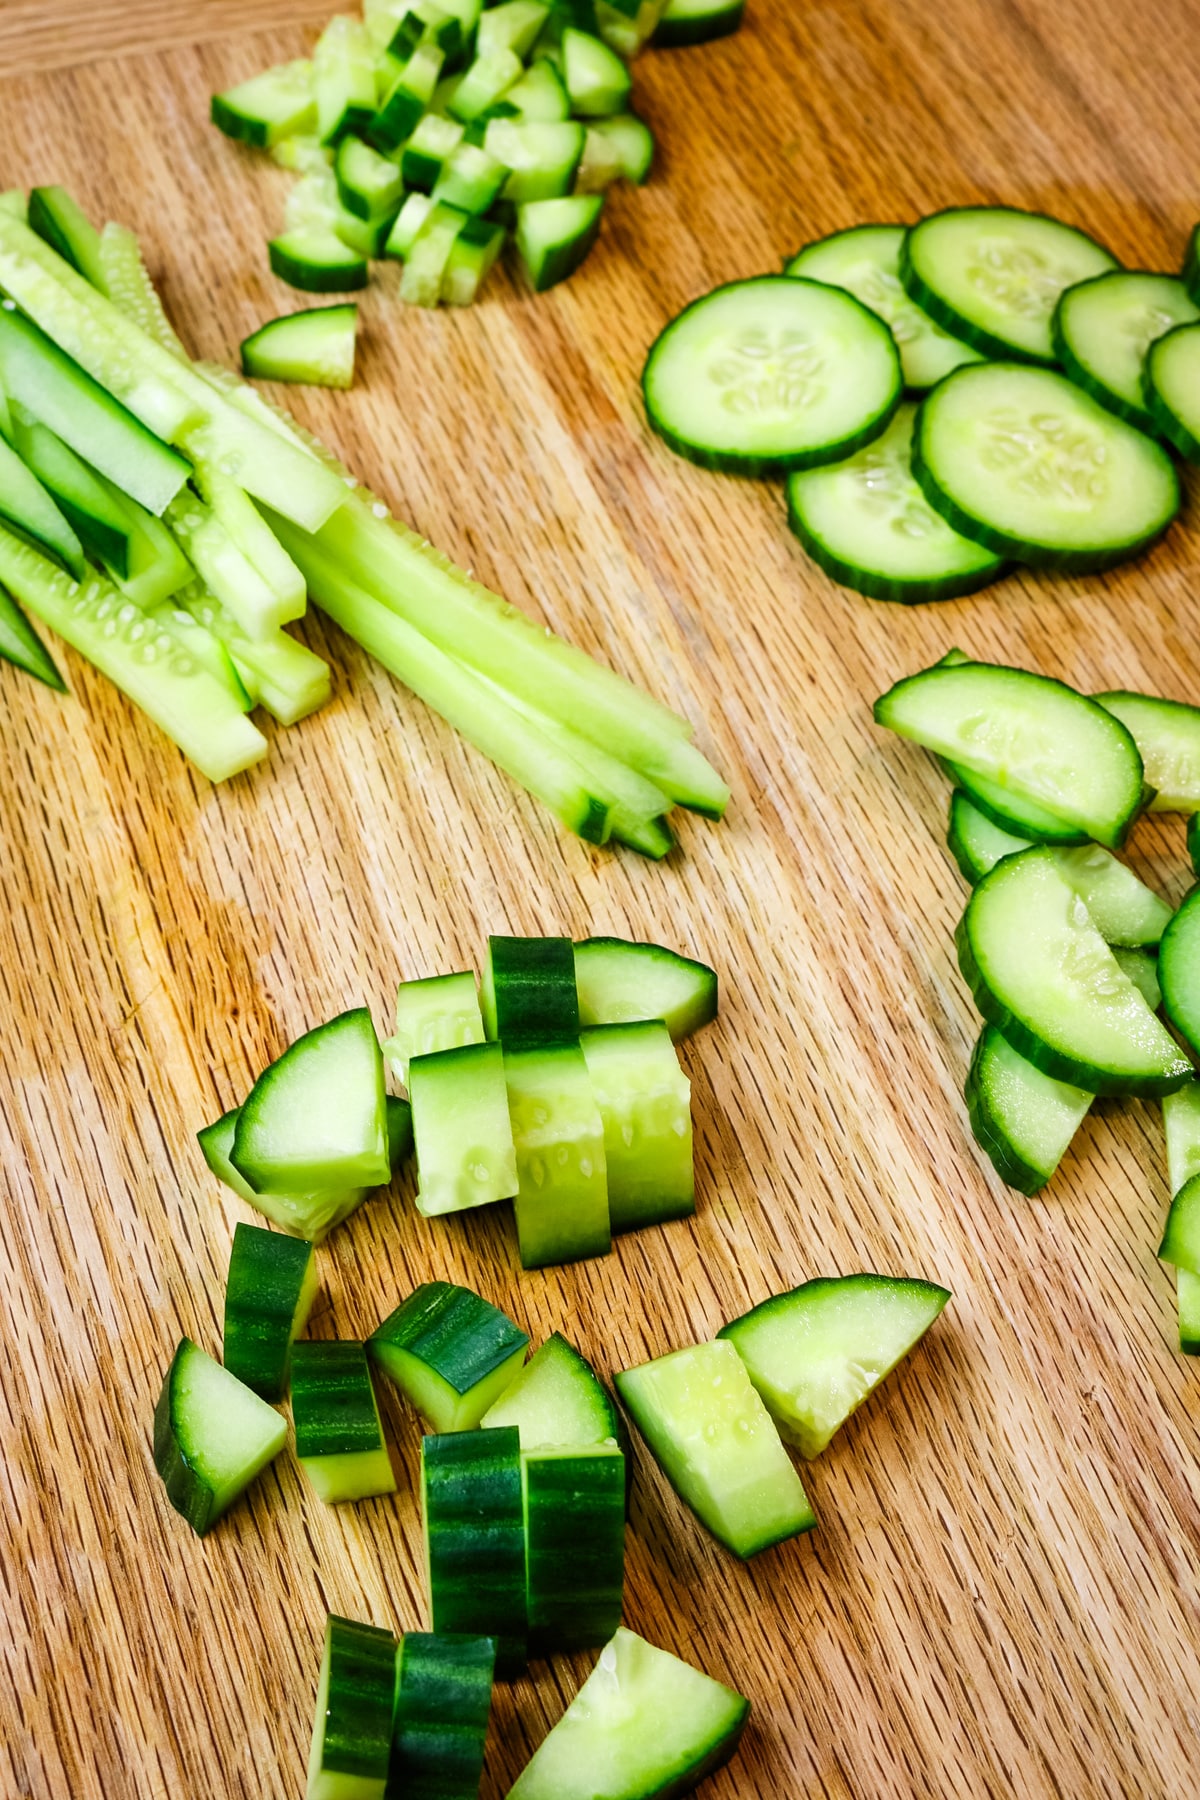 cucumber cut in many different shapes and sizes on cutting board.